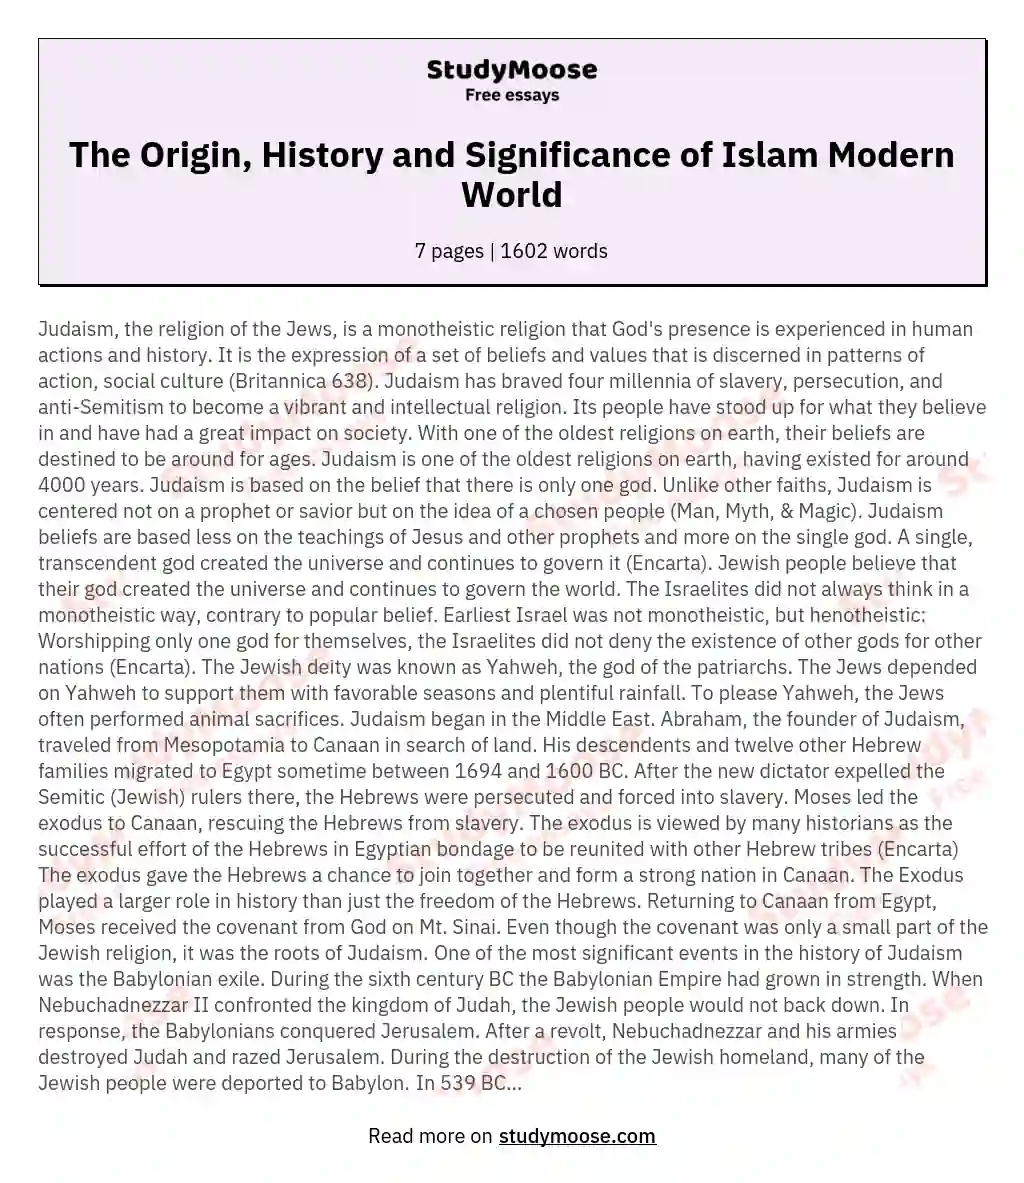 The Origin, History and Significance of Islam Modern World essay